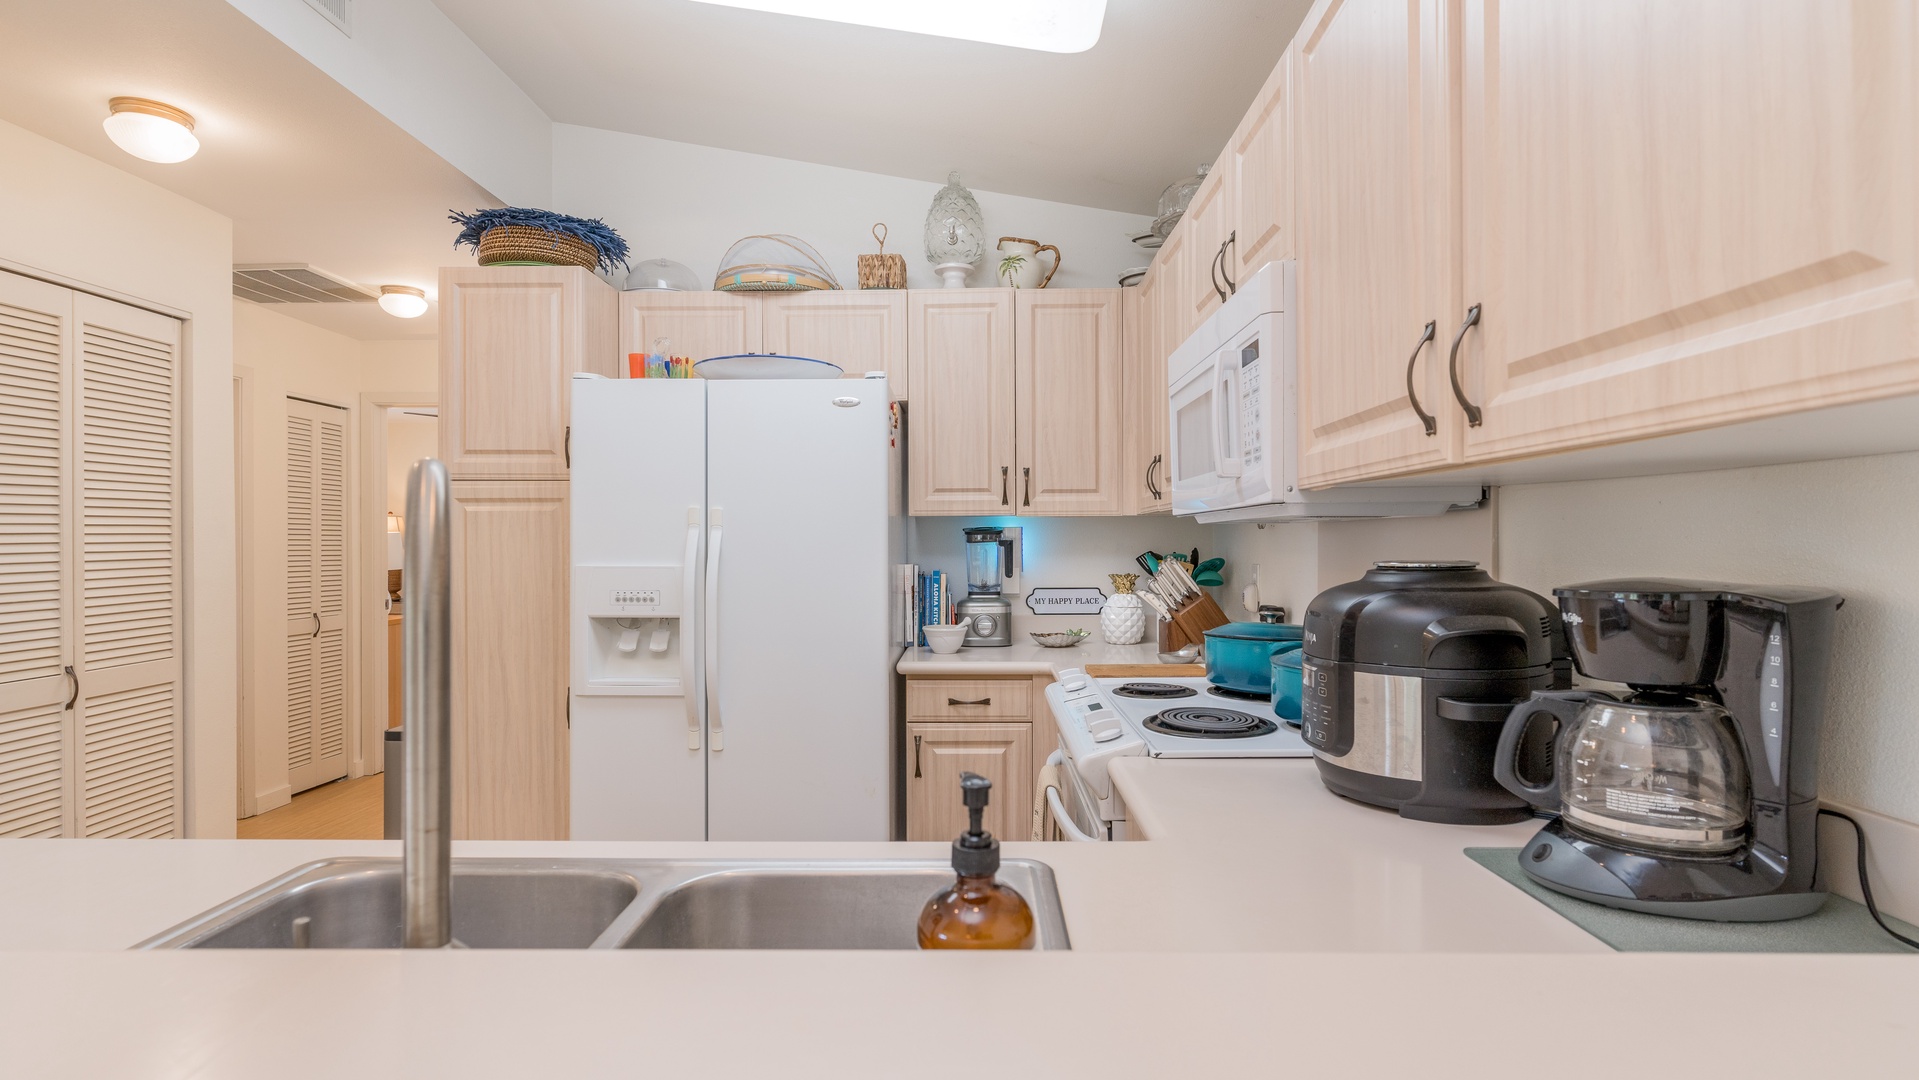 Kapolei Vacation Rentals, Fairways at Ko Olina 4A - The kitchen is the heart of the home.